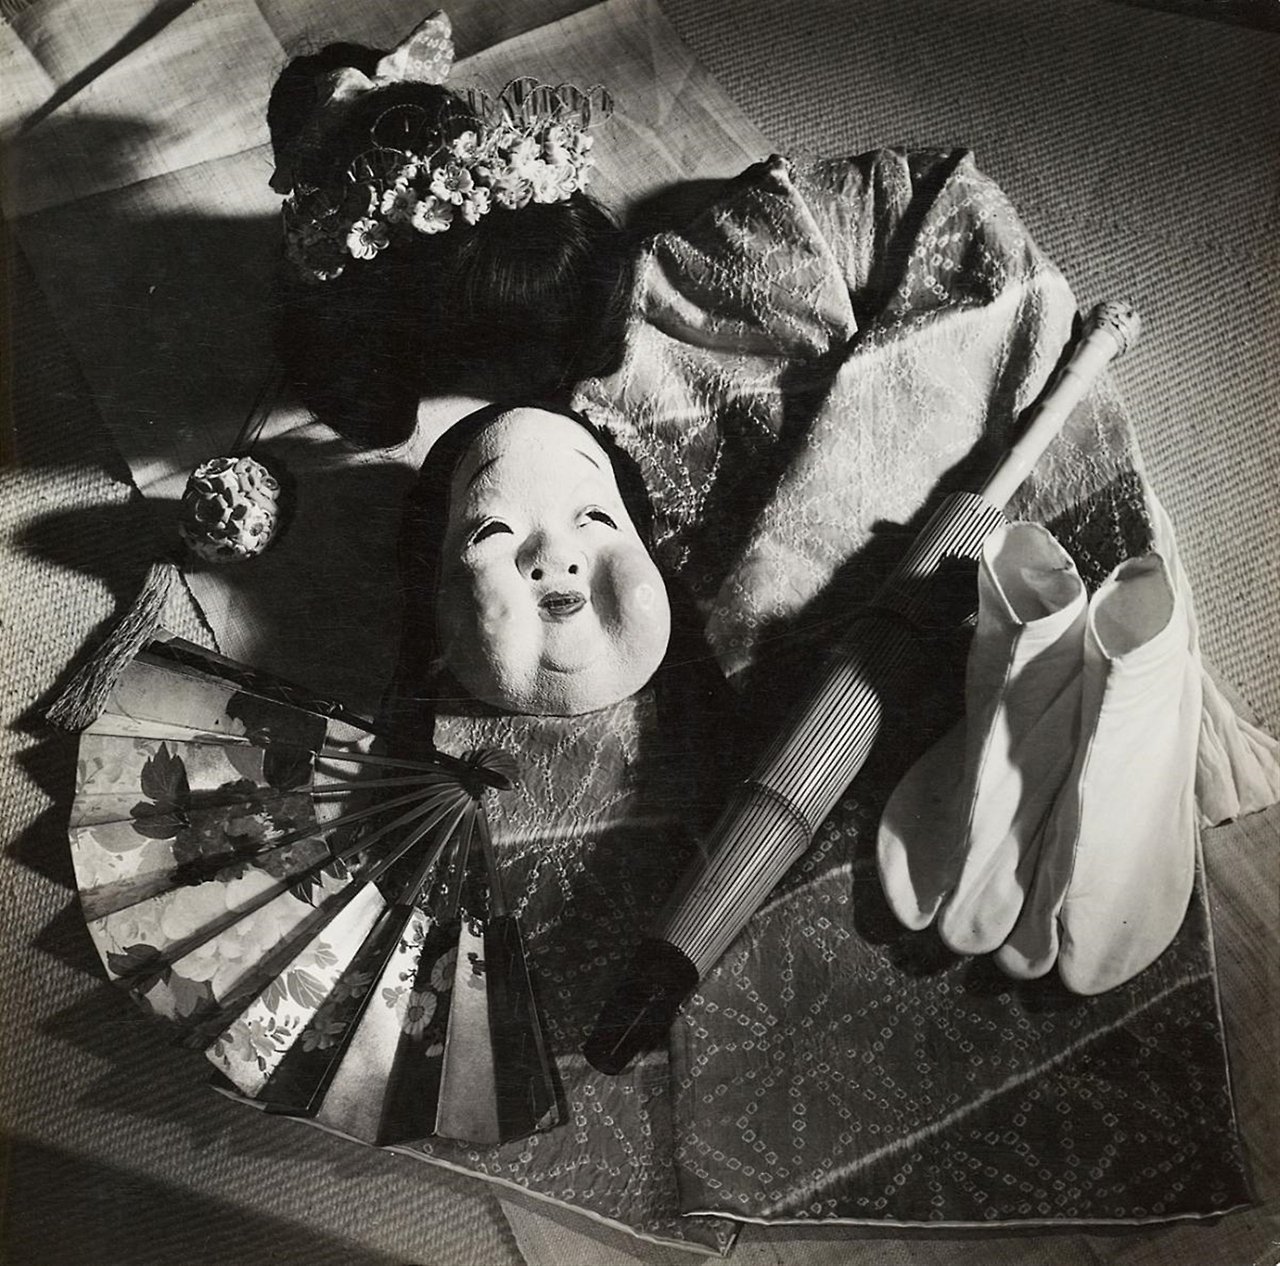 Willy Maywald
Untitled, circa 1930s